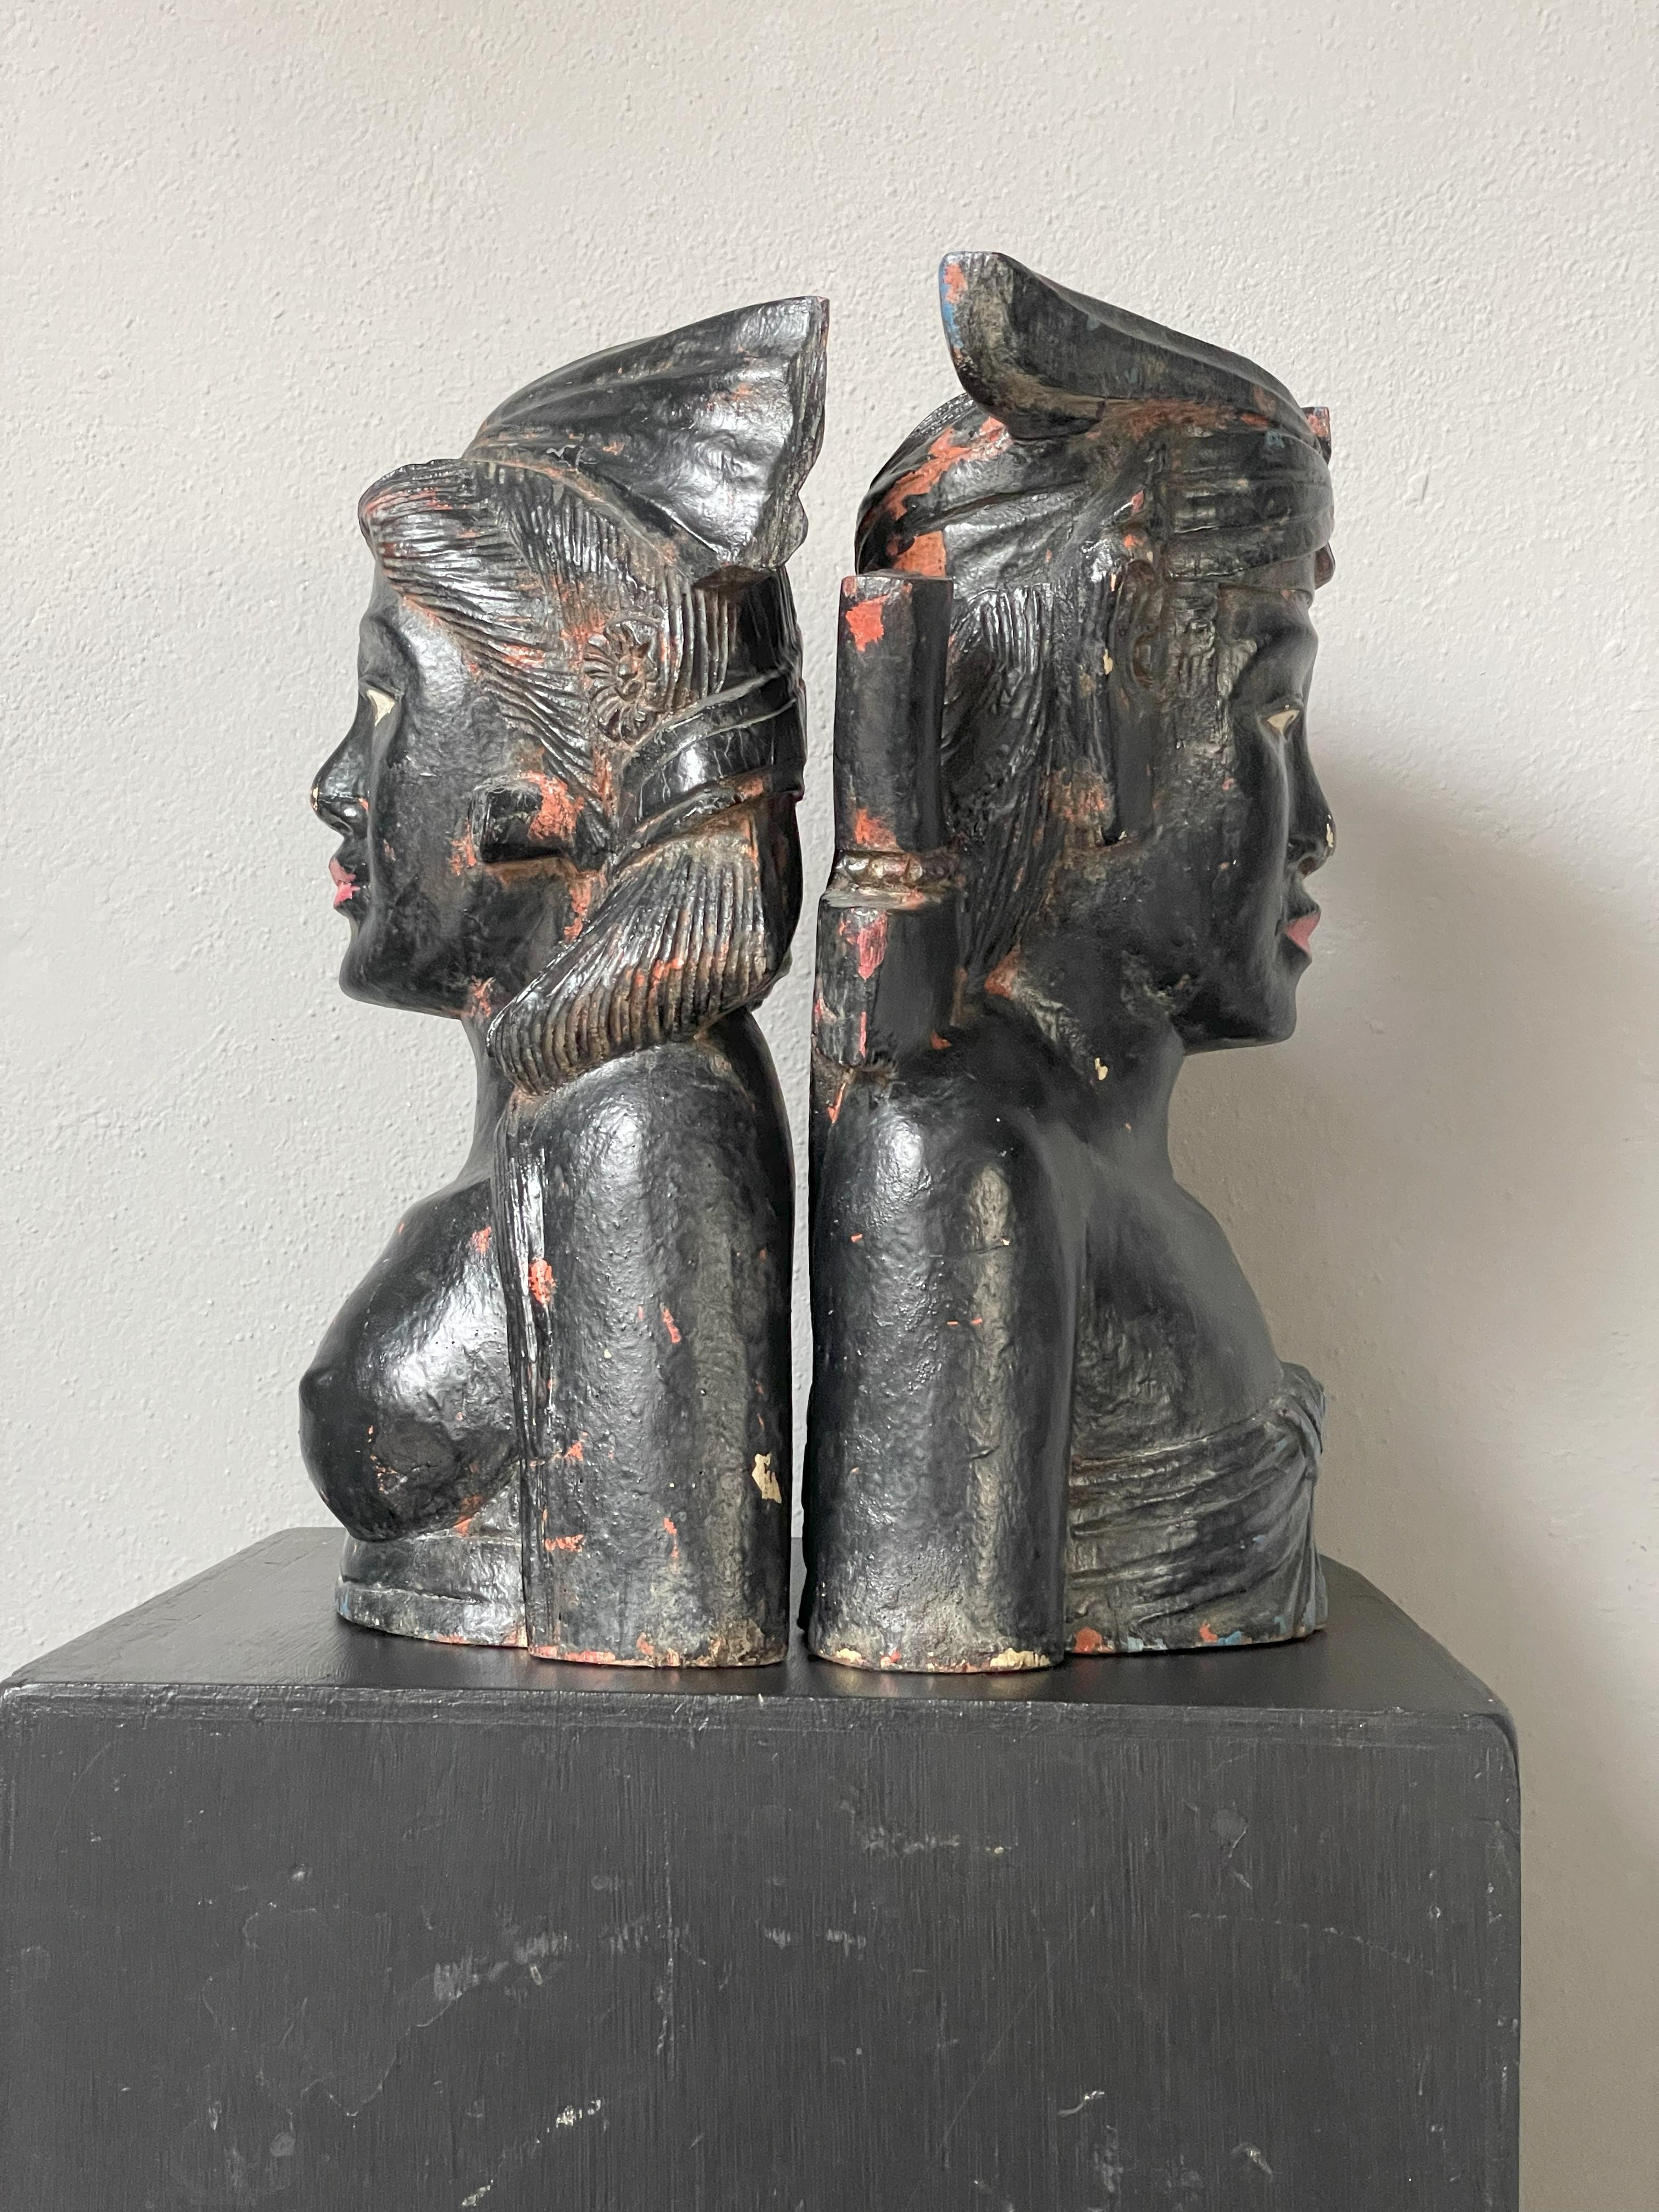 Two beautiful sculptures made of wood and painted black.